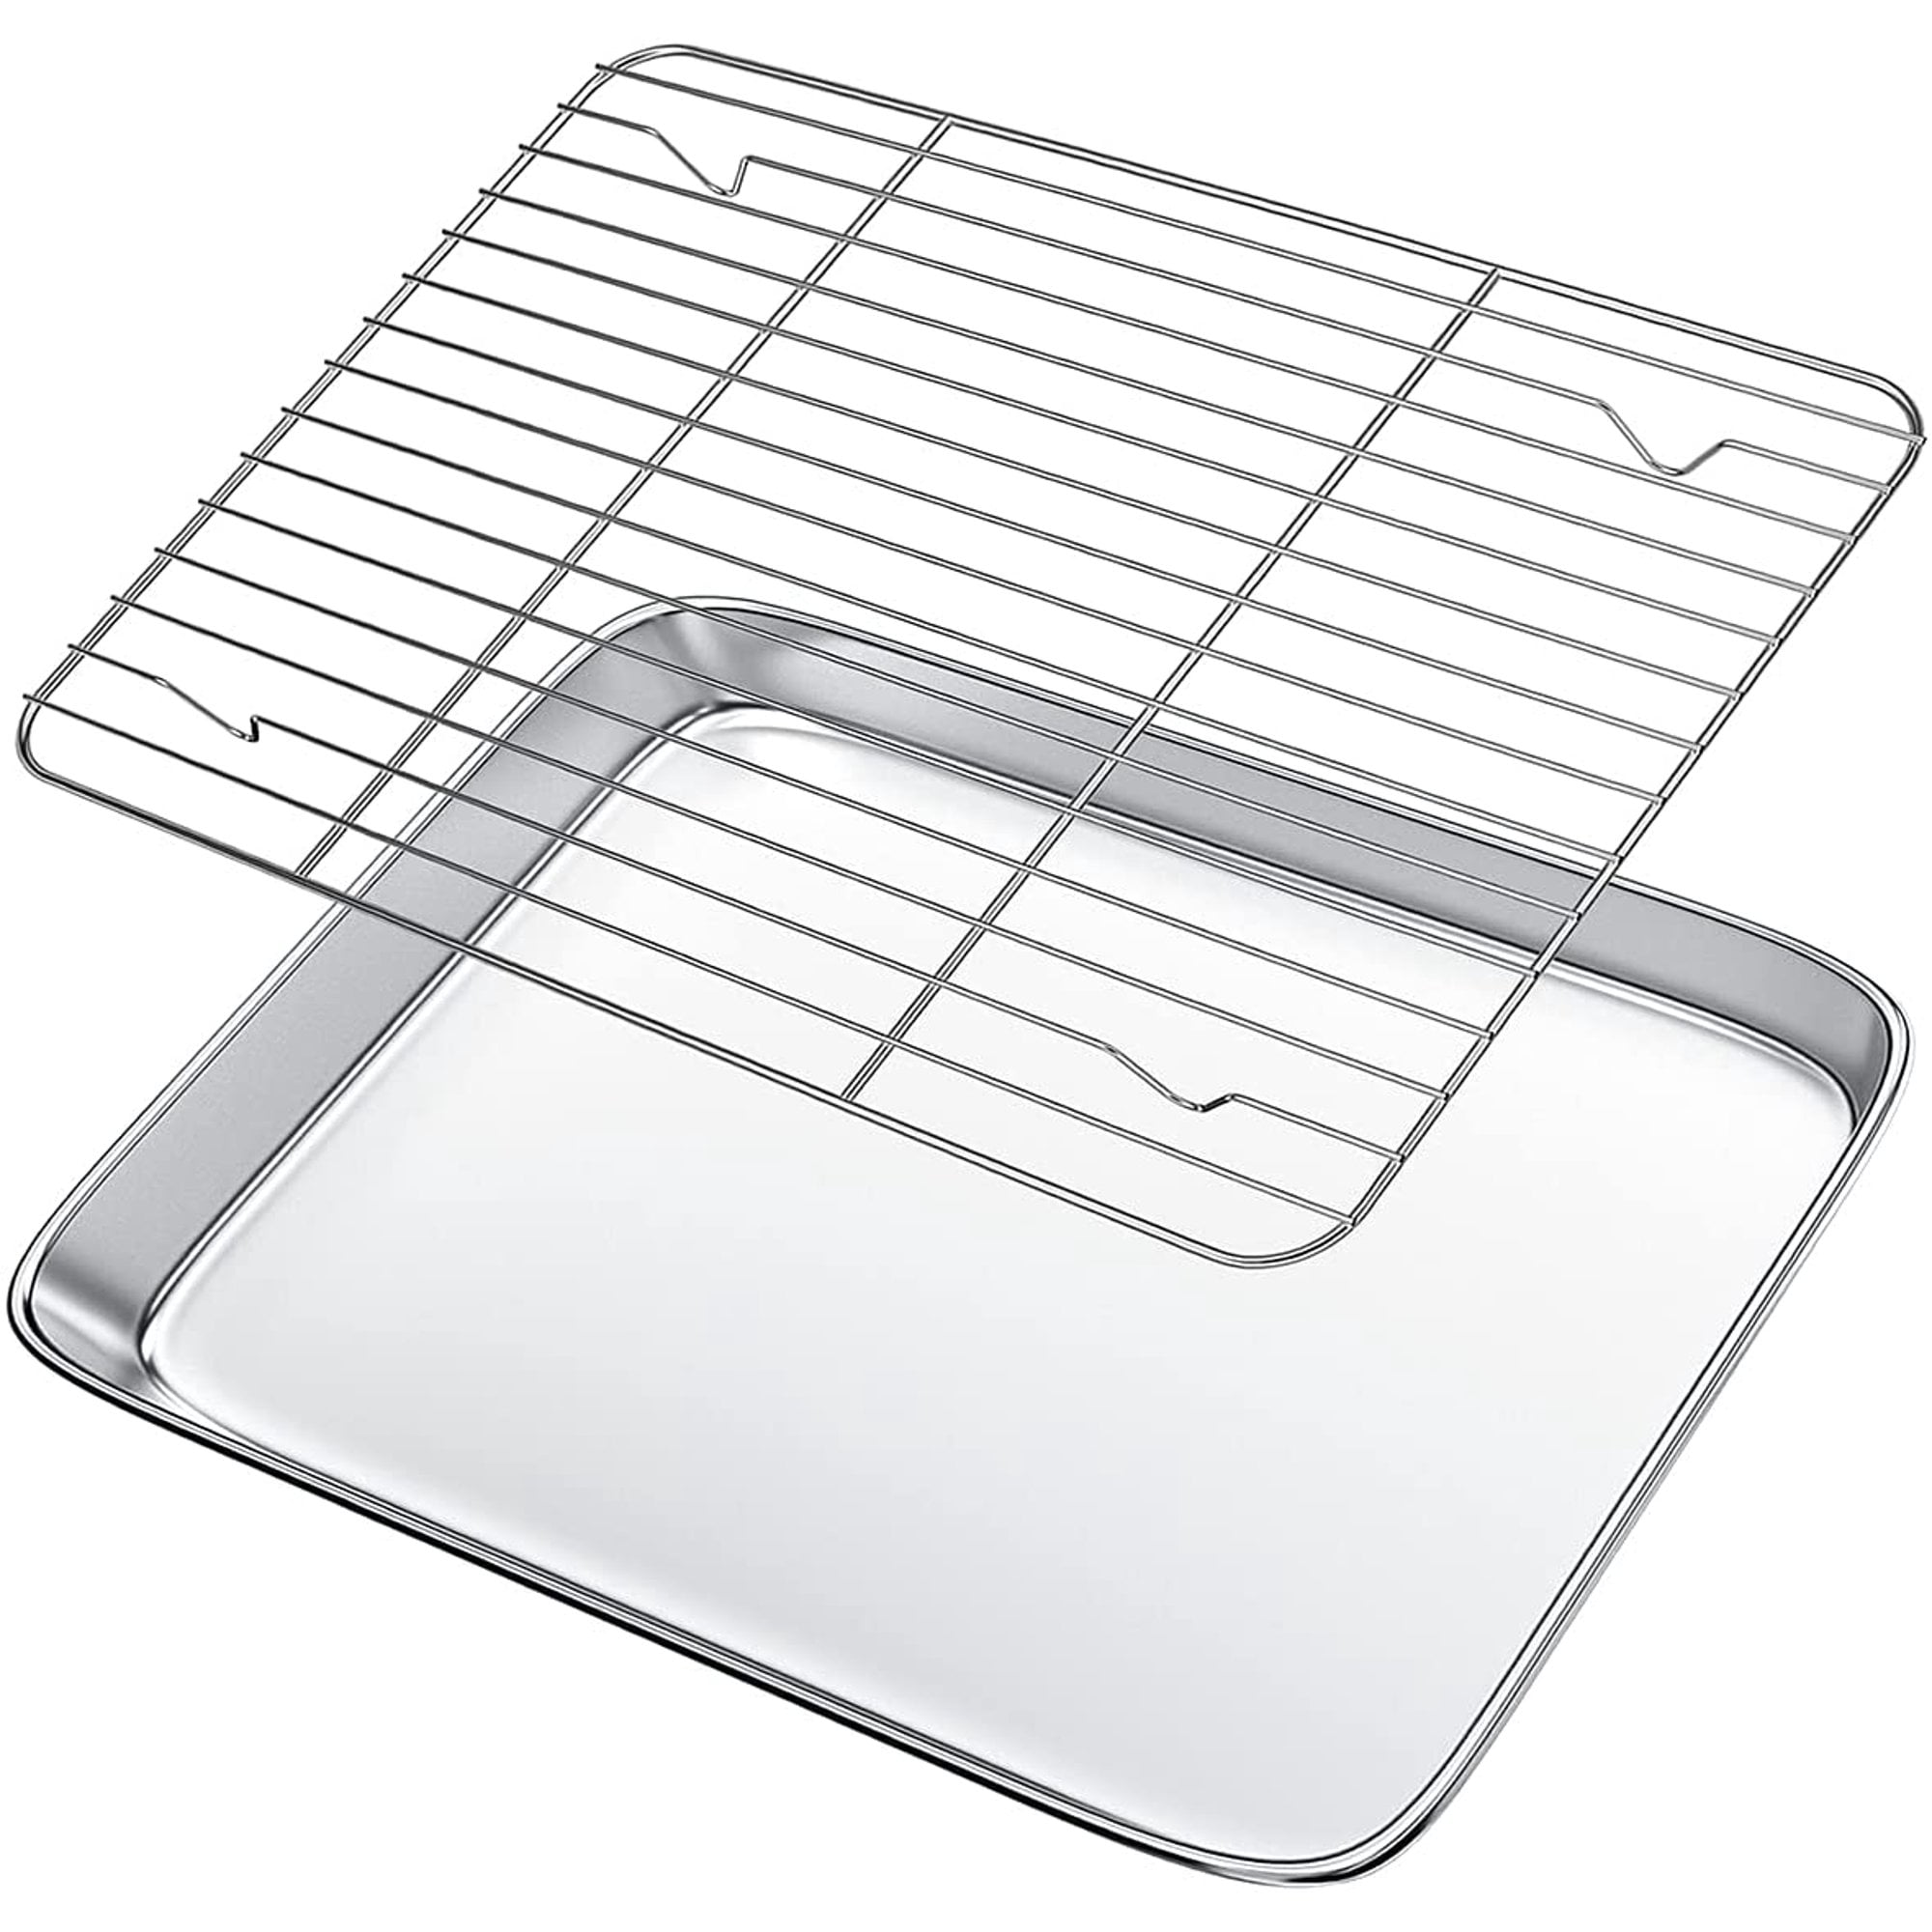 Cera Titanware One Shelf Baking Tray Set - 1 Large & 2 Small Carbon Steel  Stackable Oven Trays with Non-Stick Coating